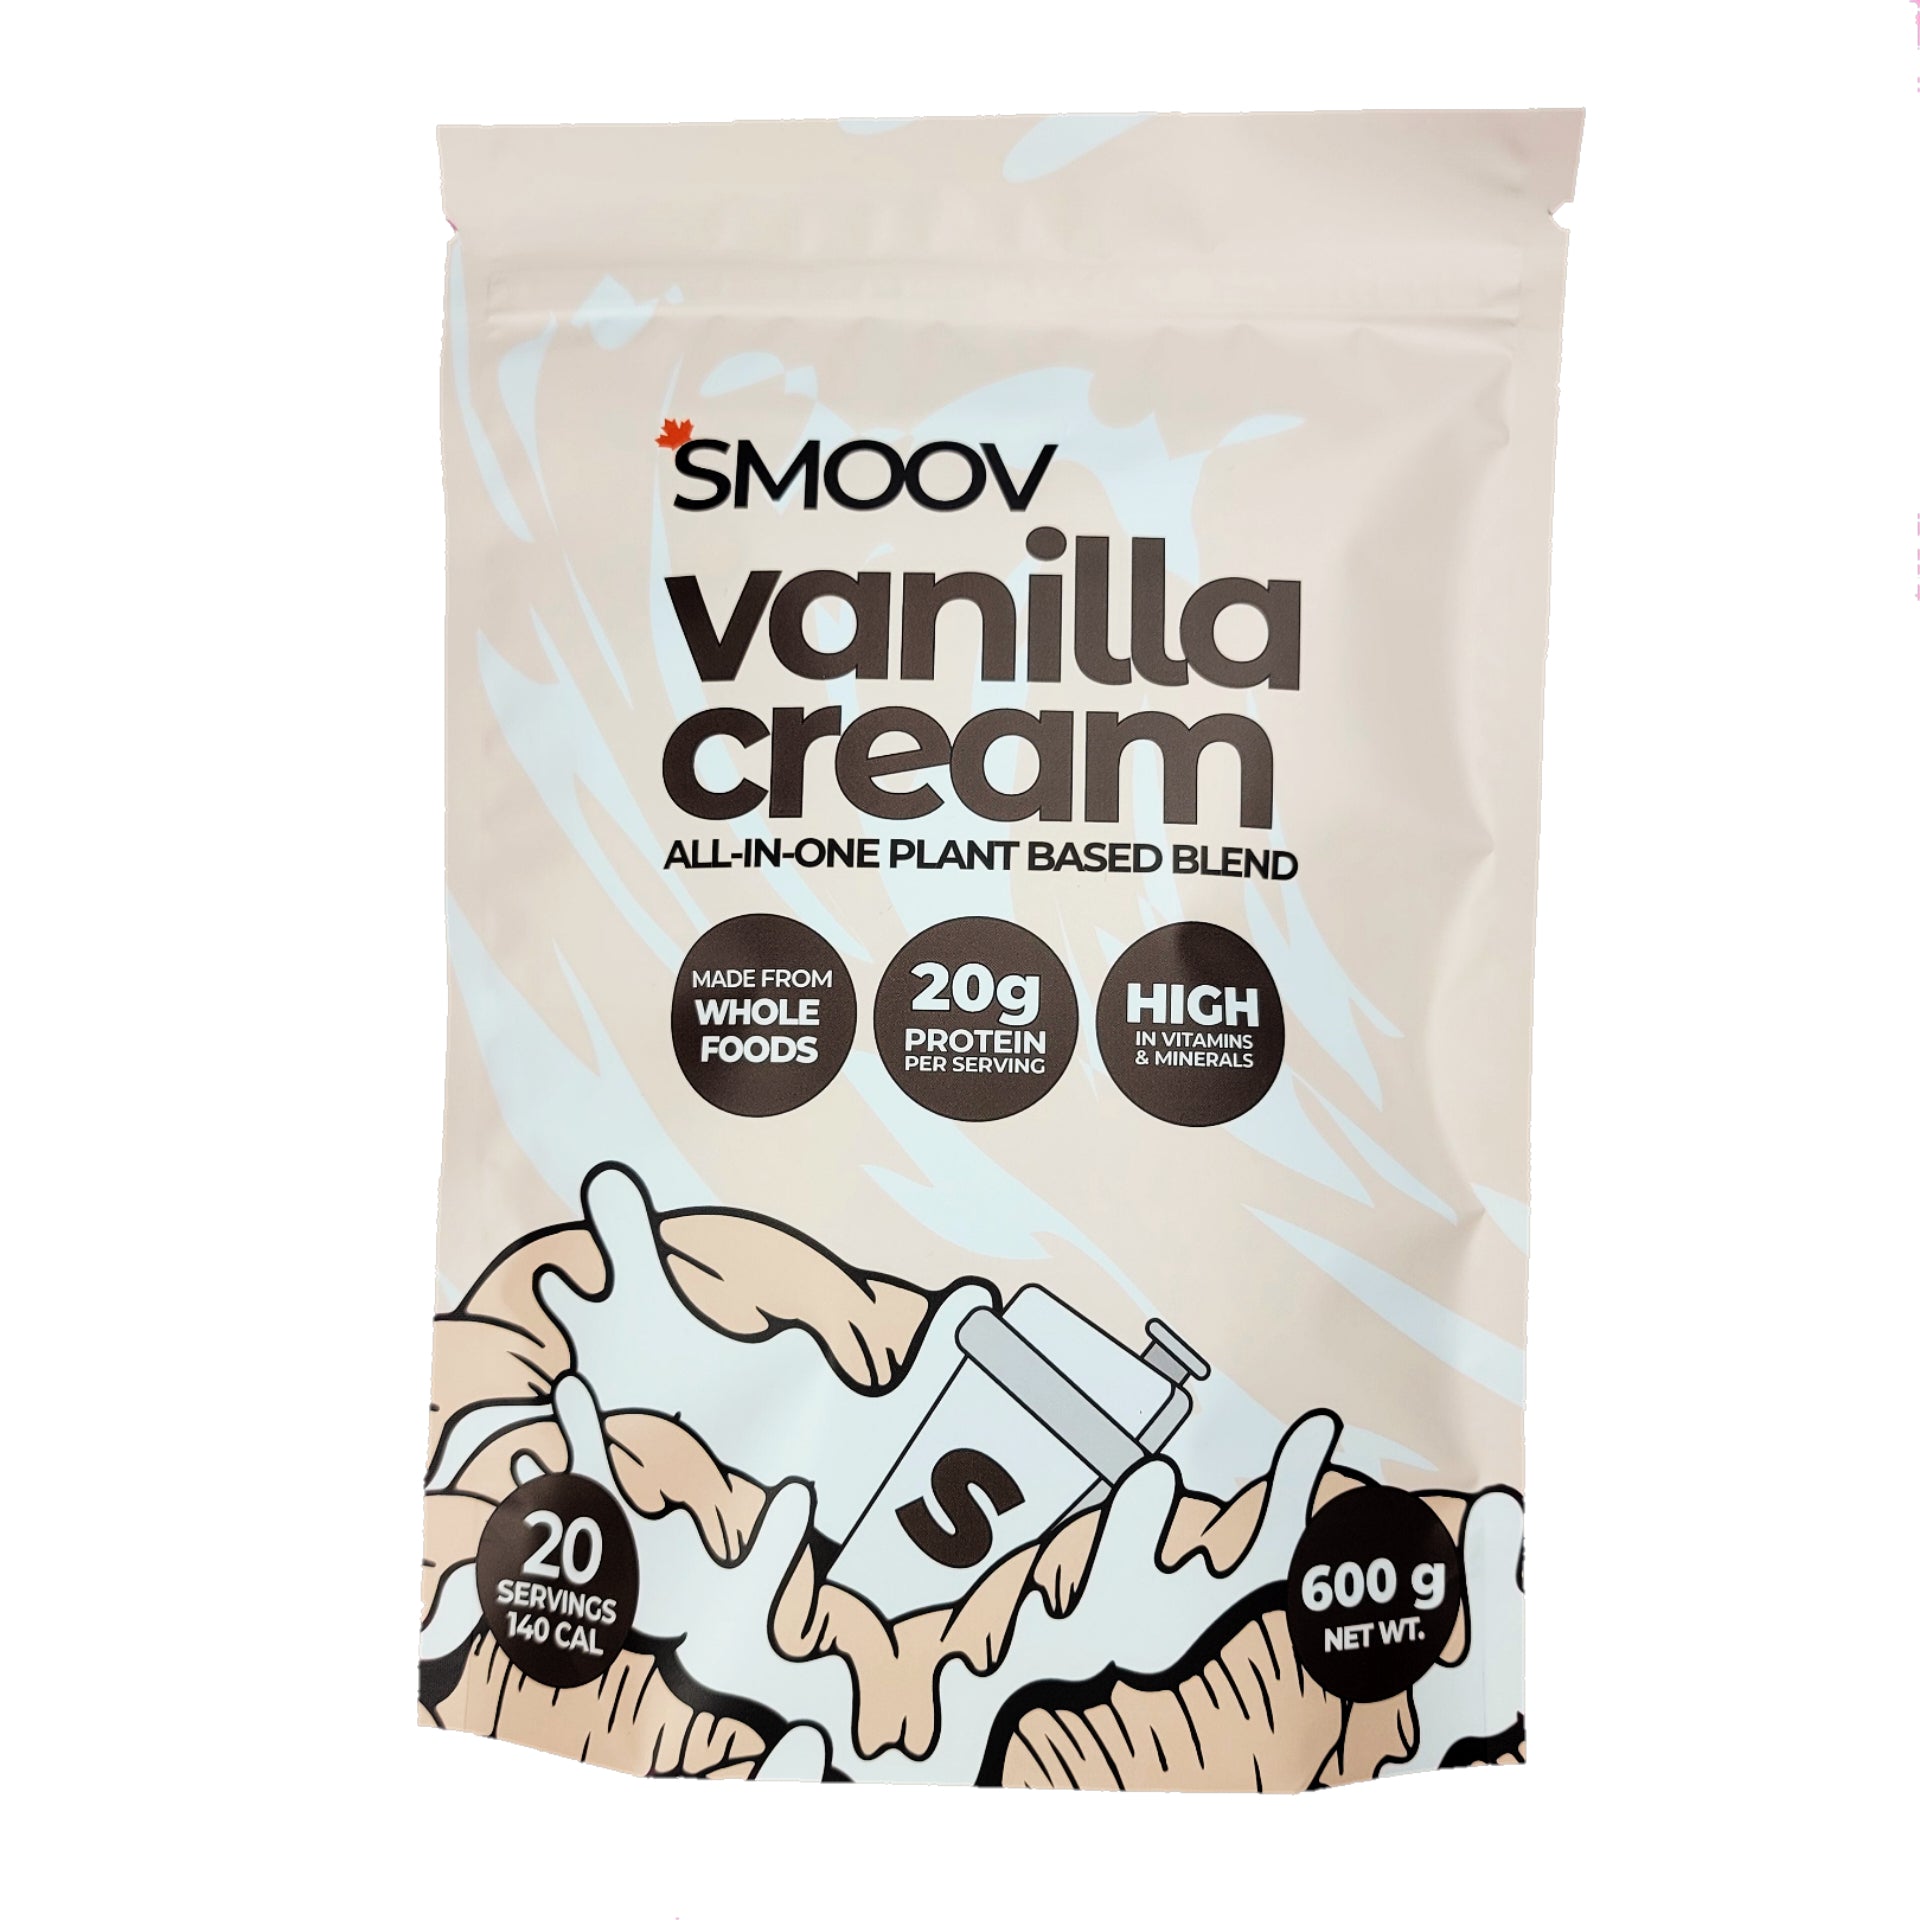 SMOOV blush blend contains 8 skin loving superfoods. Packed with antioxidants like vitamins C & E to help with hair growth, skin repair and immune support. Also a rich source of fiber to help satisfy hunger, cravings and improve digestion, making it the perfect addition to a weight loss diet.